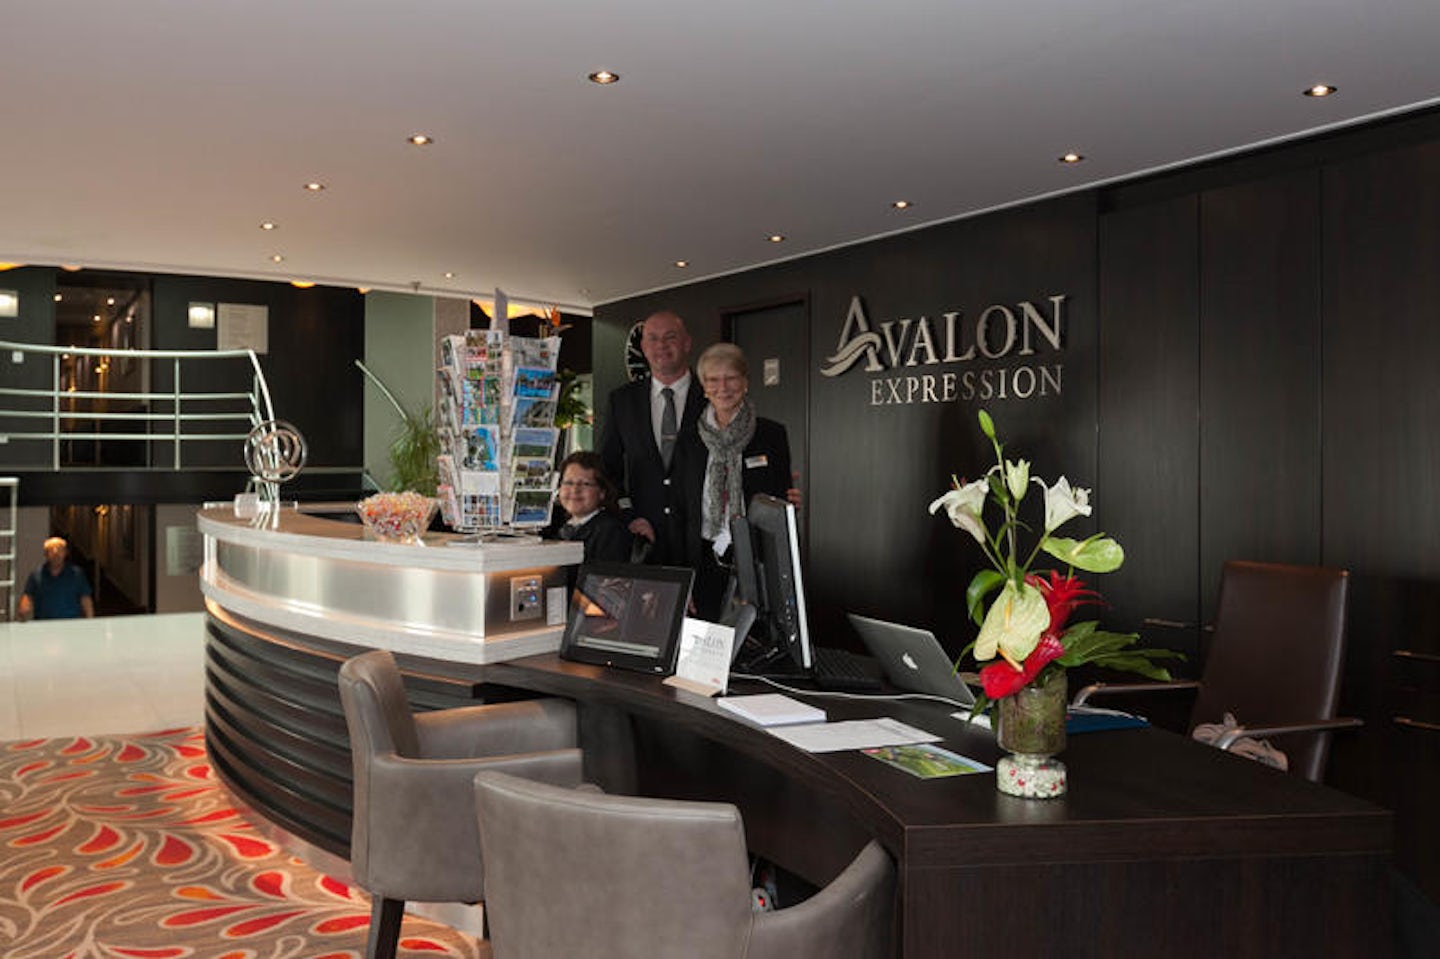 Guest Services on Avalon Expression